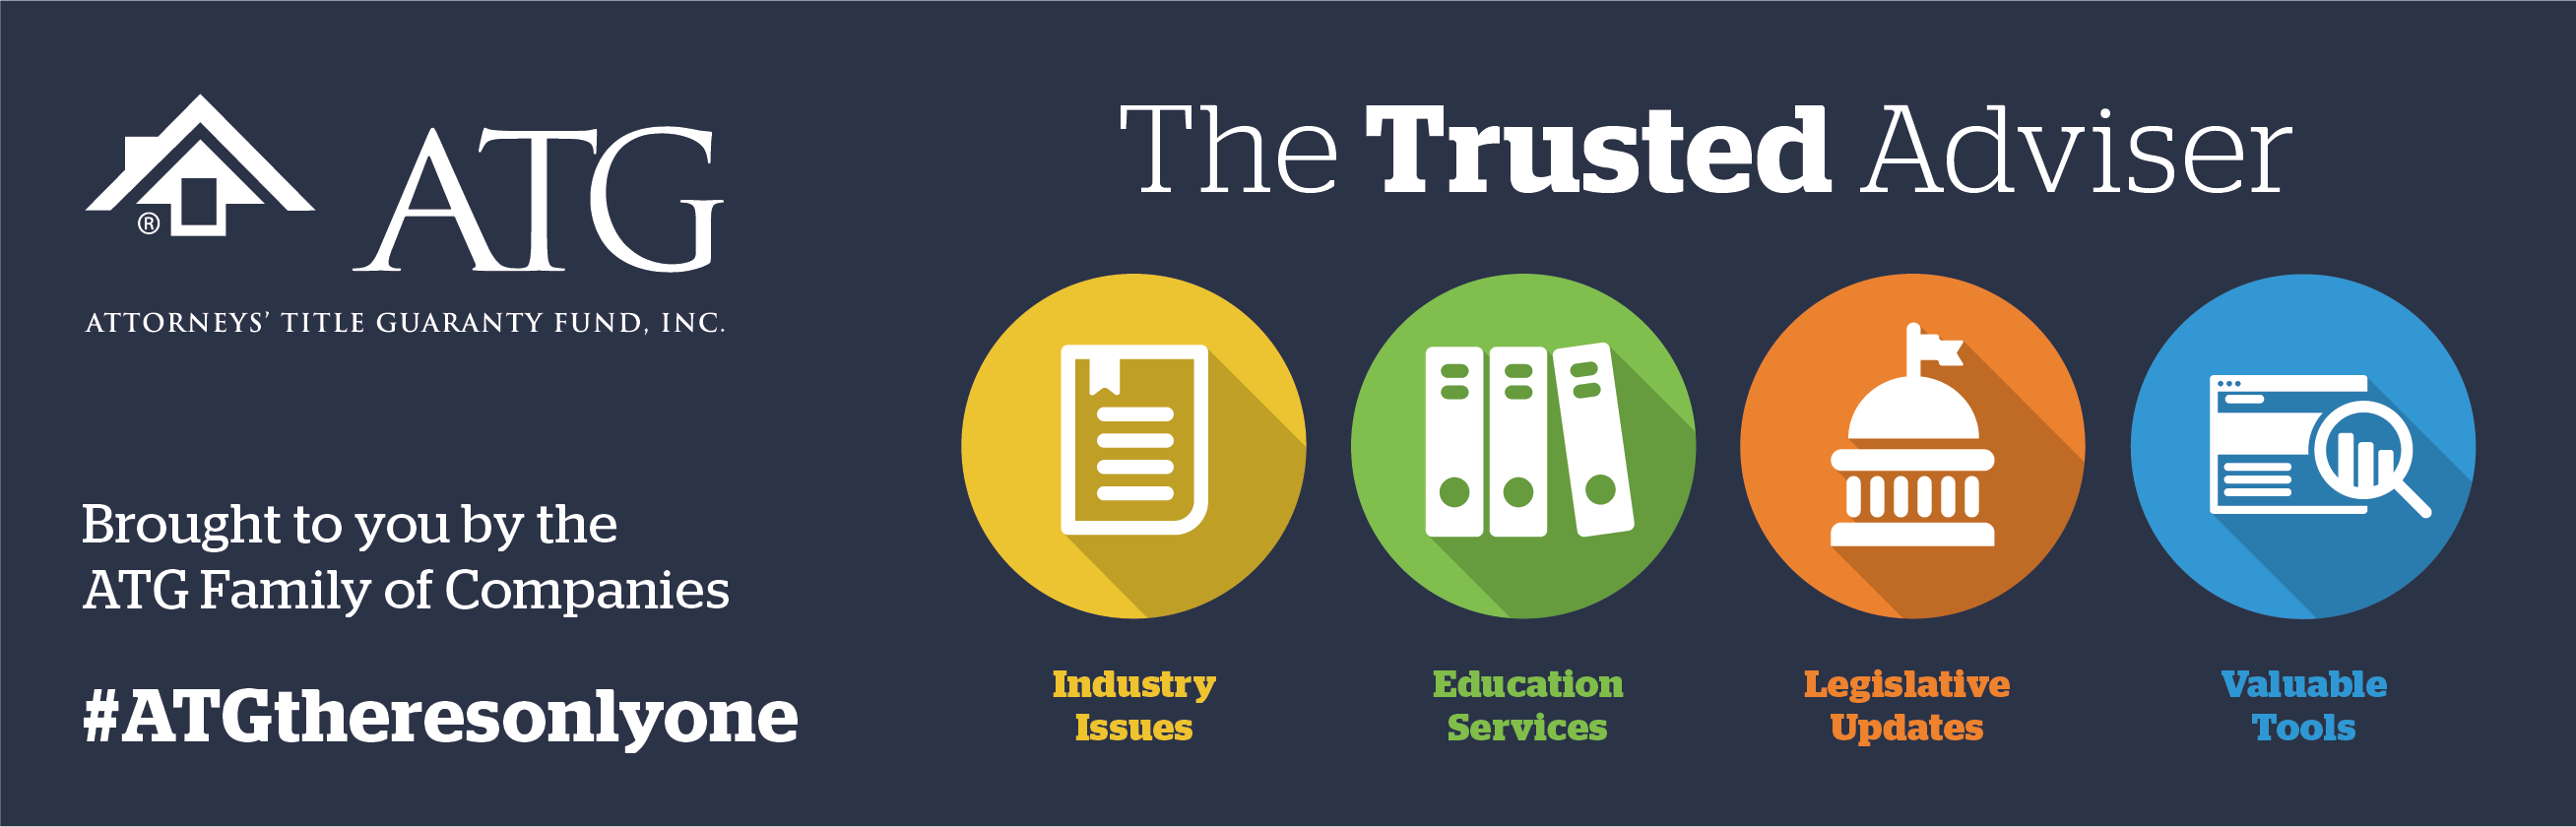 The ATG Trusted Adviser